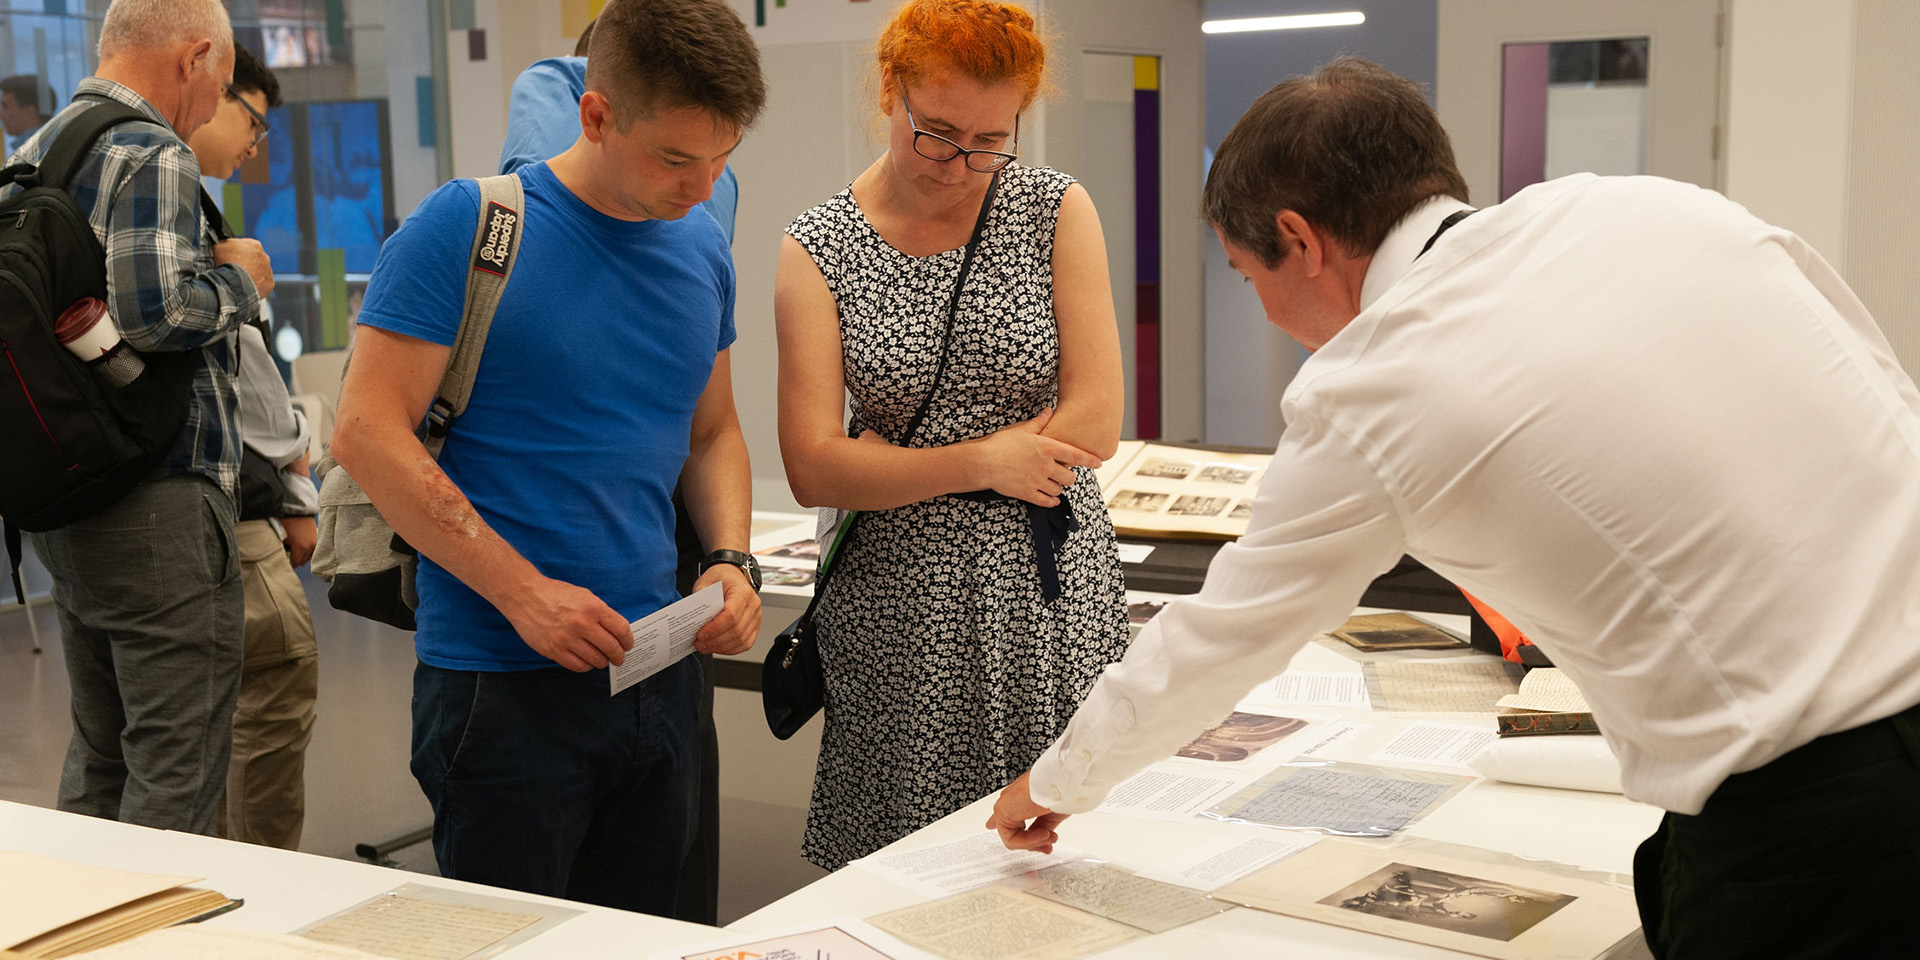 Exploring material from the National Army Museum's archive